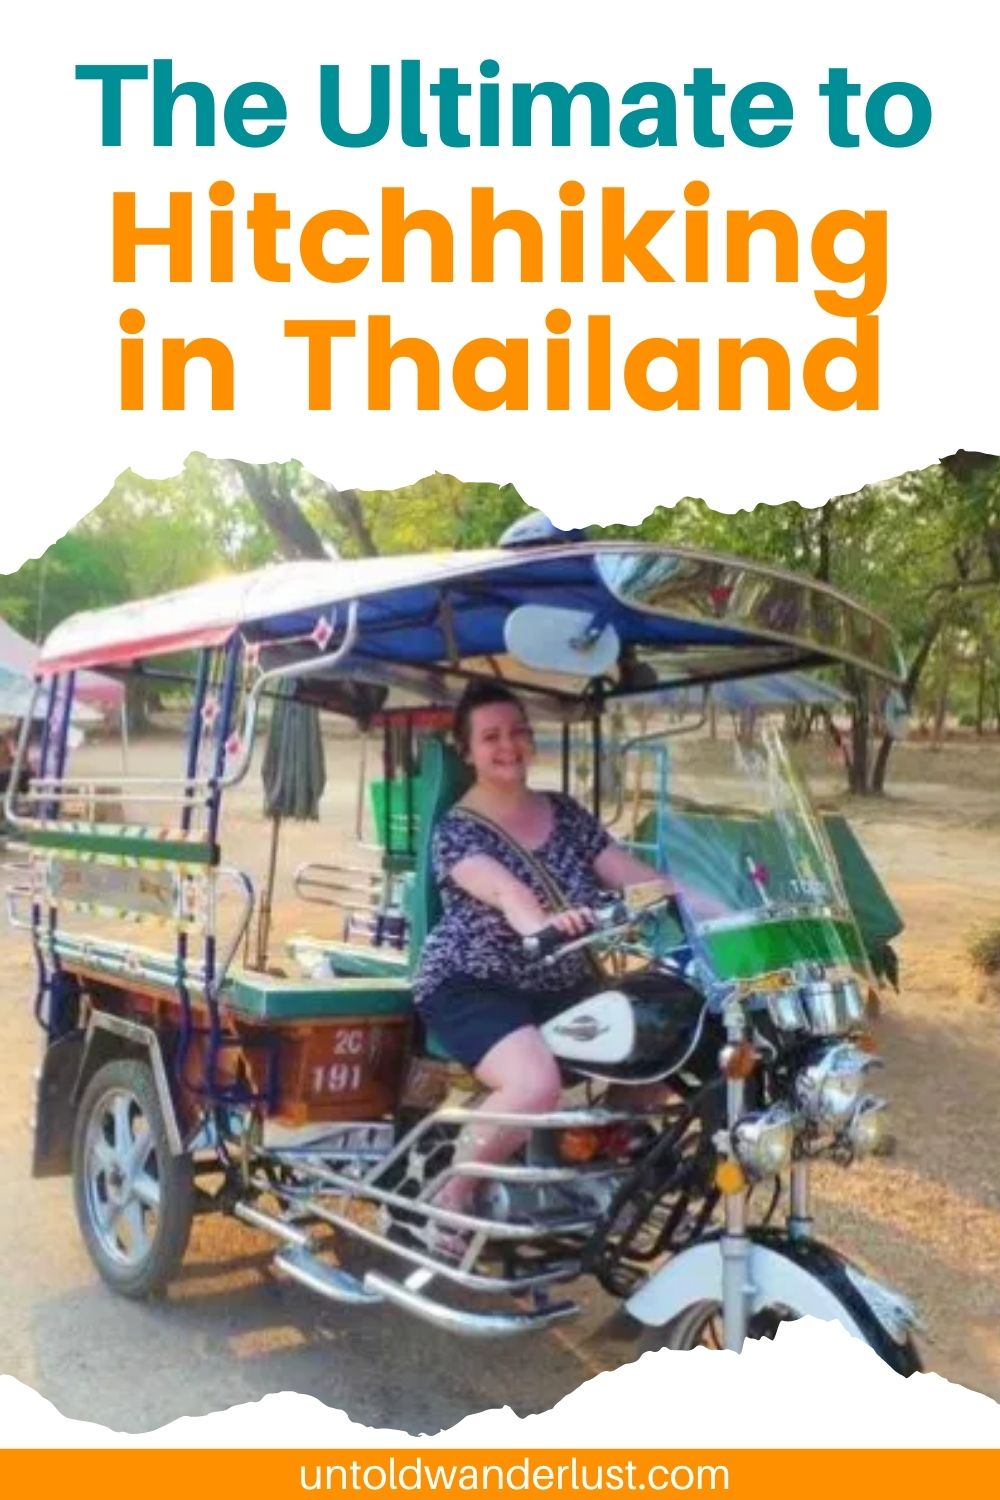 The Ultimate Guide to Hitchhiking in Thailand